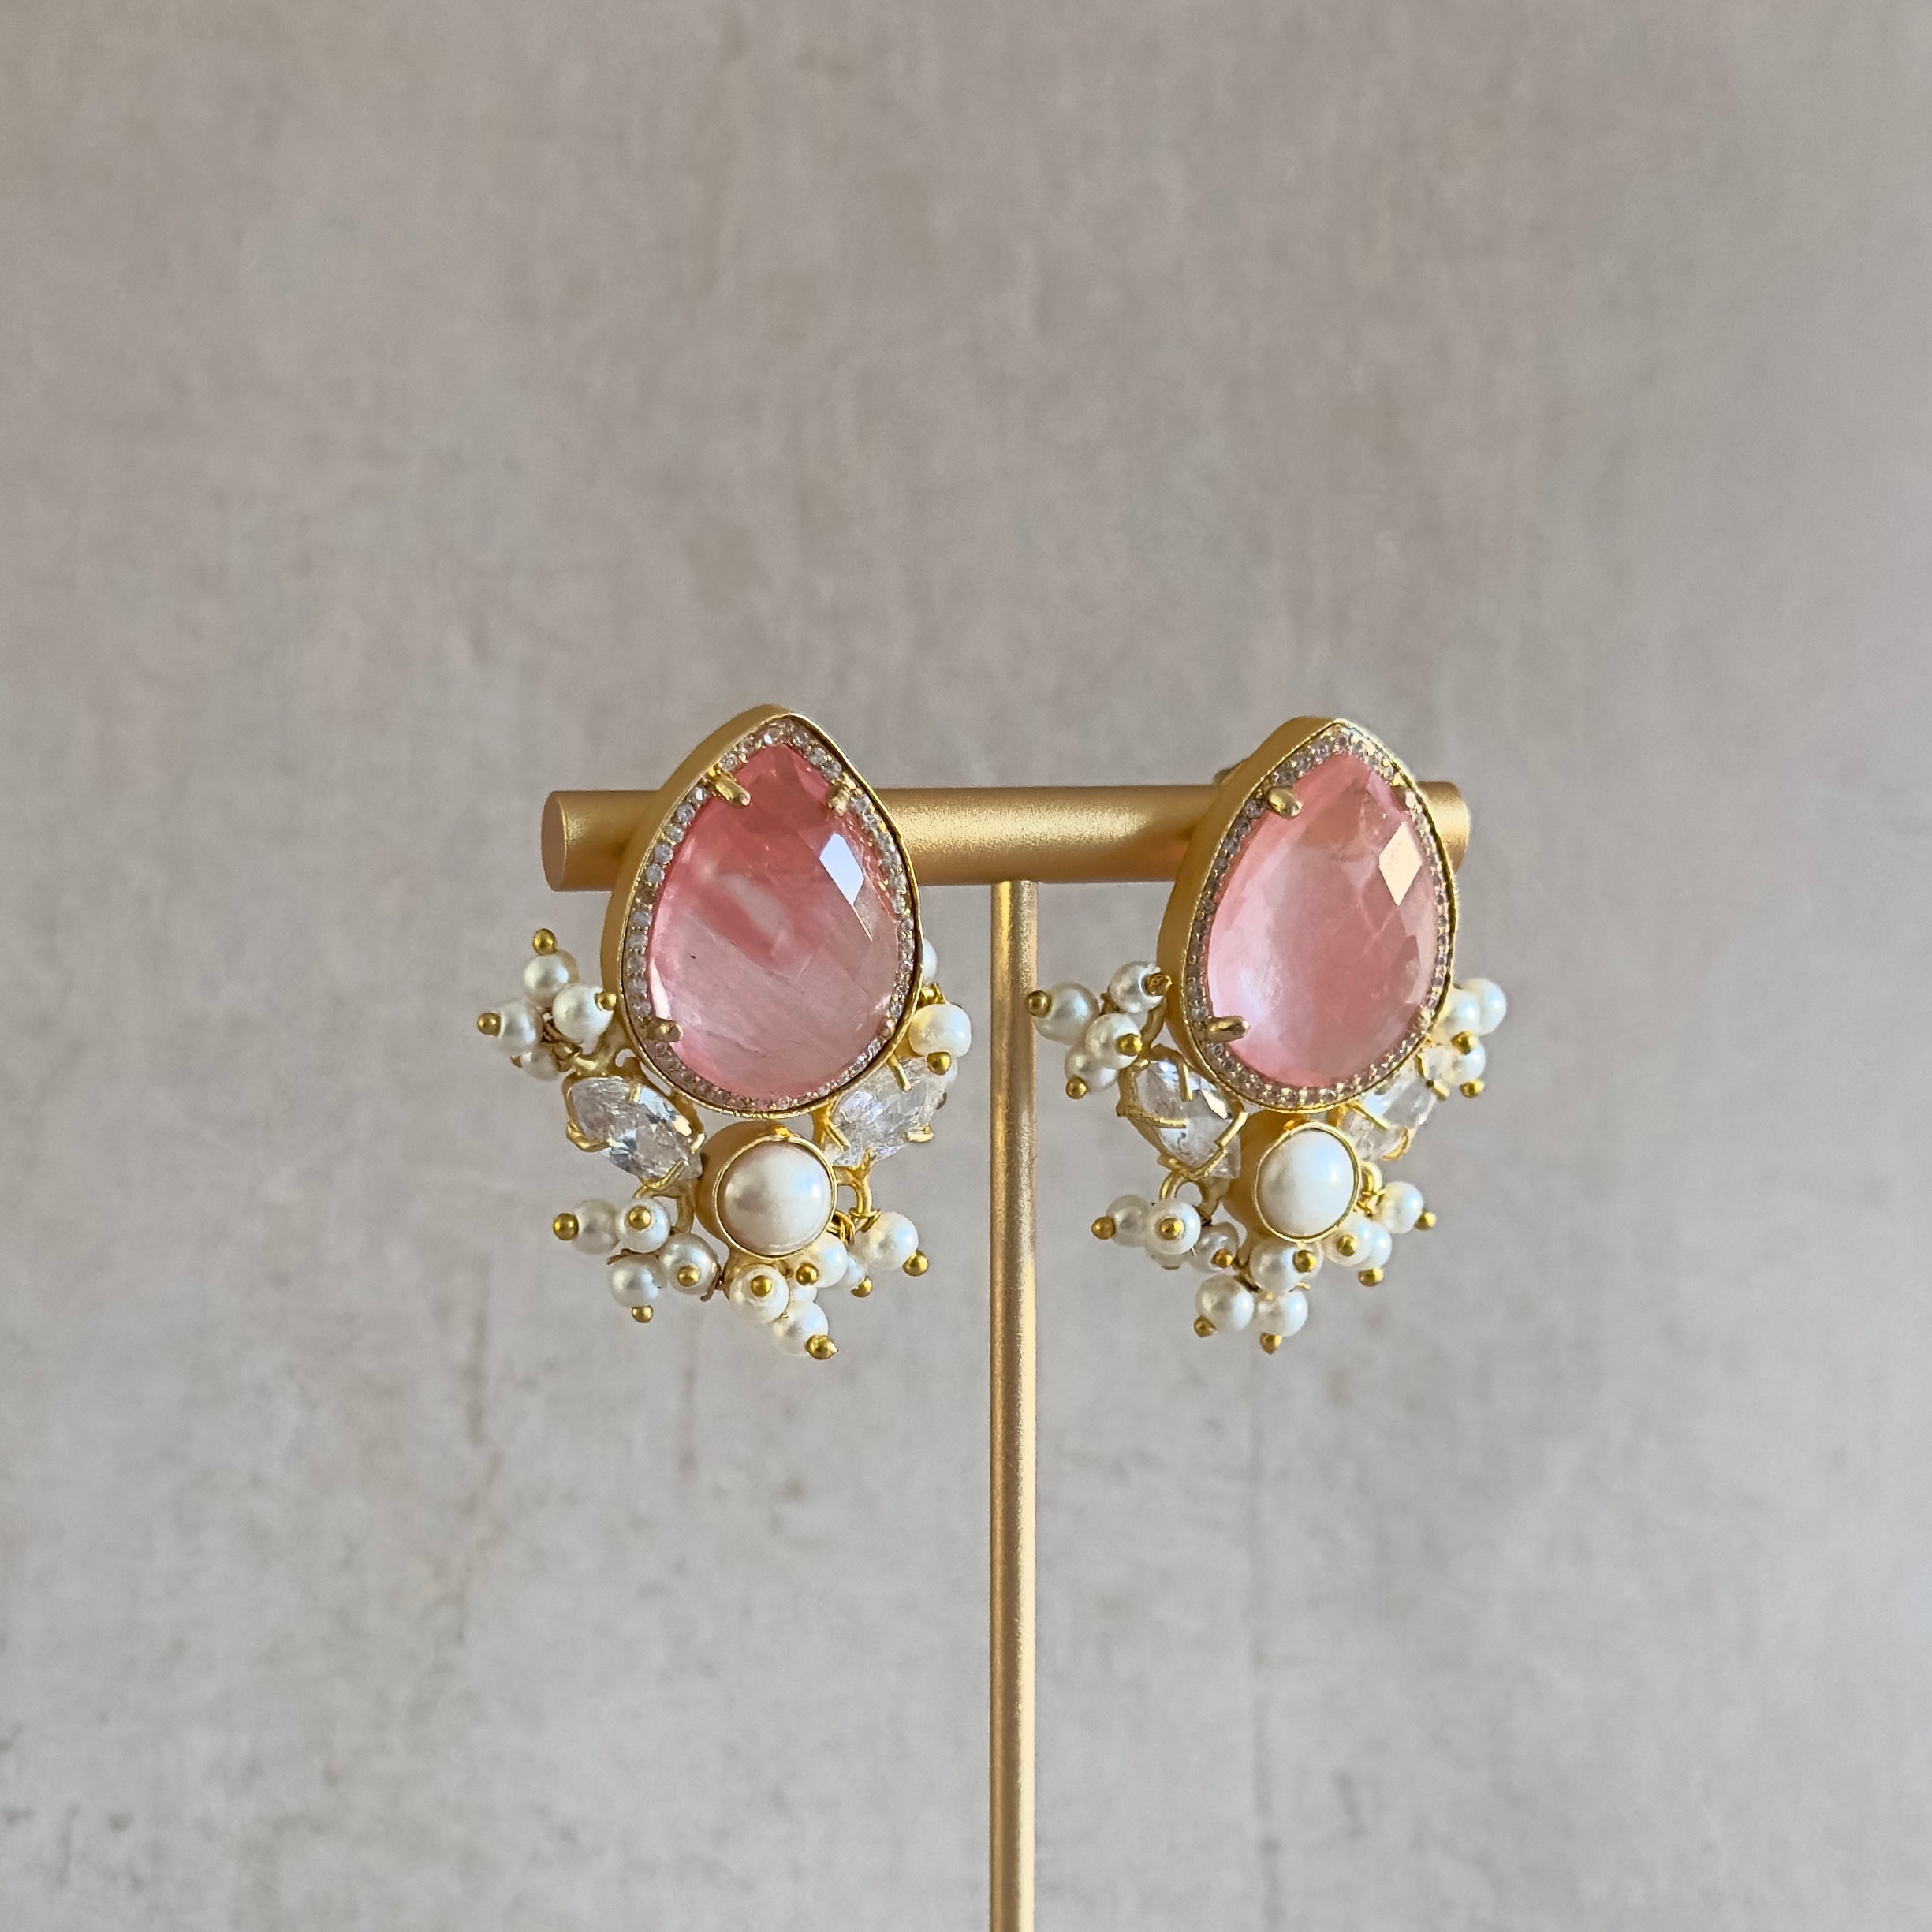 Add a touch of elegance with our new Bria Earrings featuring a crimson quartz center stone, pearl accents, and sparkling cz crystals. Elevate any outfit with a pop of color and shine. A must-have for the fashion-forward.